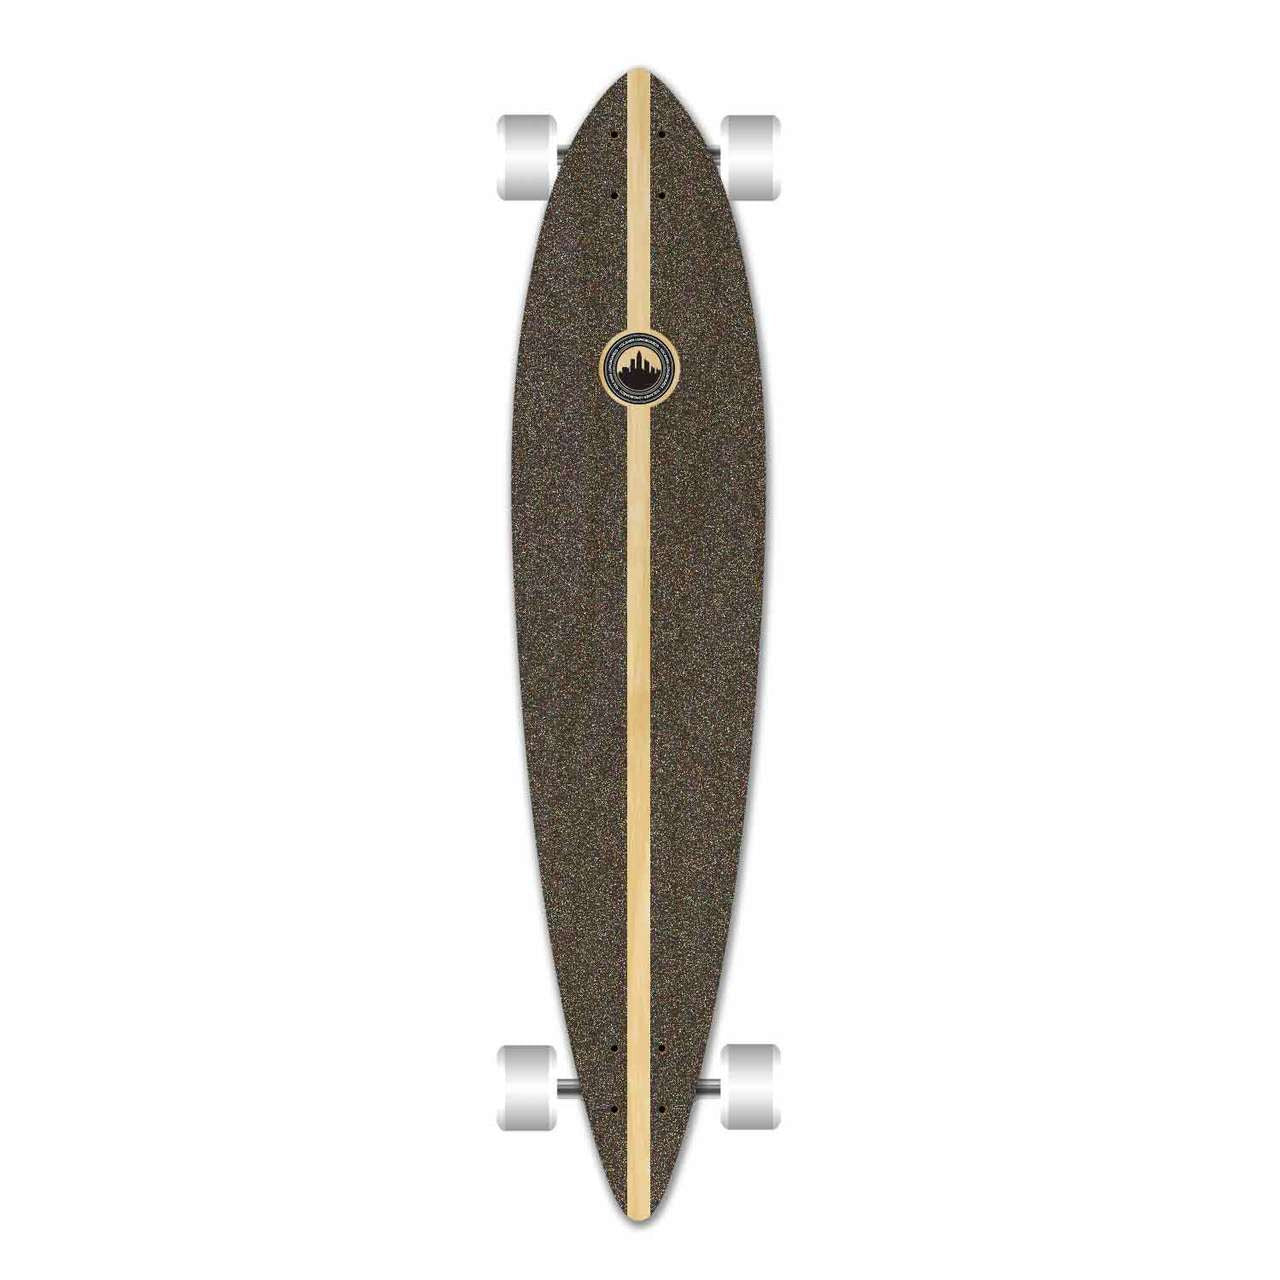 Yocaher Pintail Longboard Complete - Tropical Night